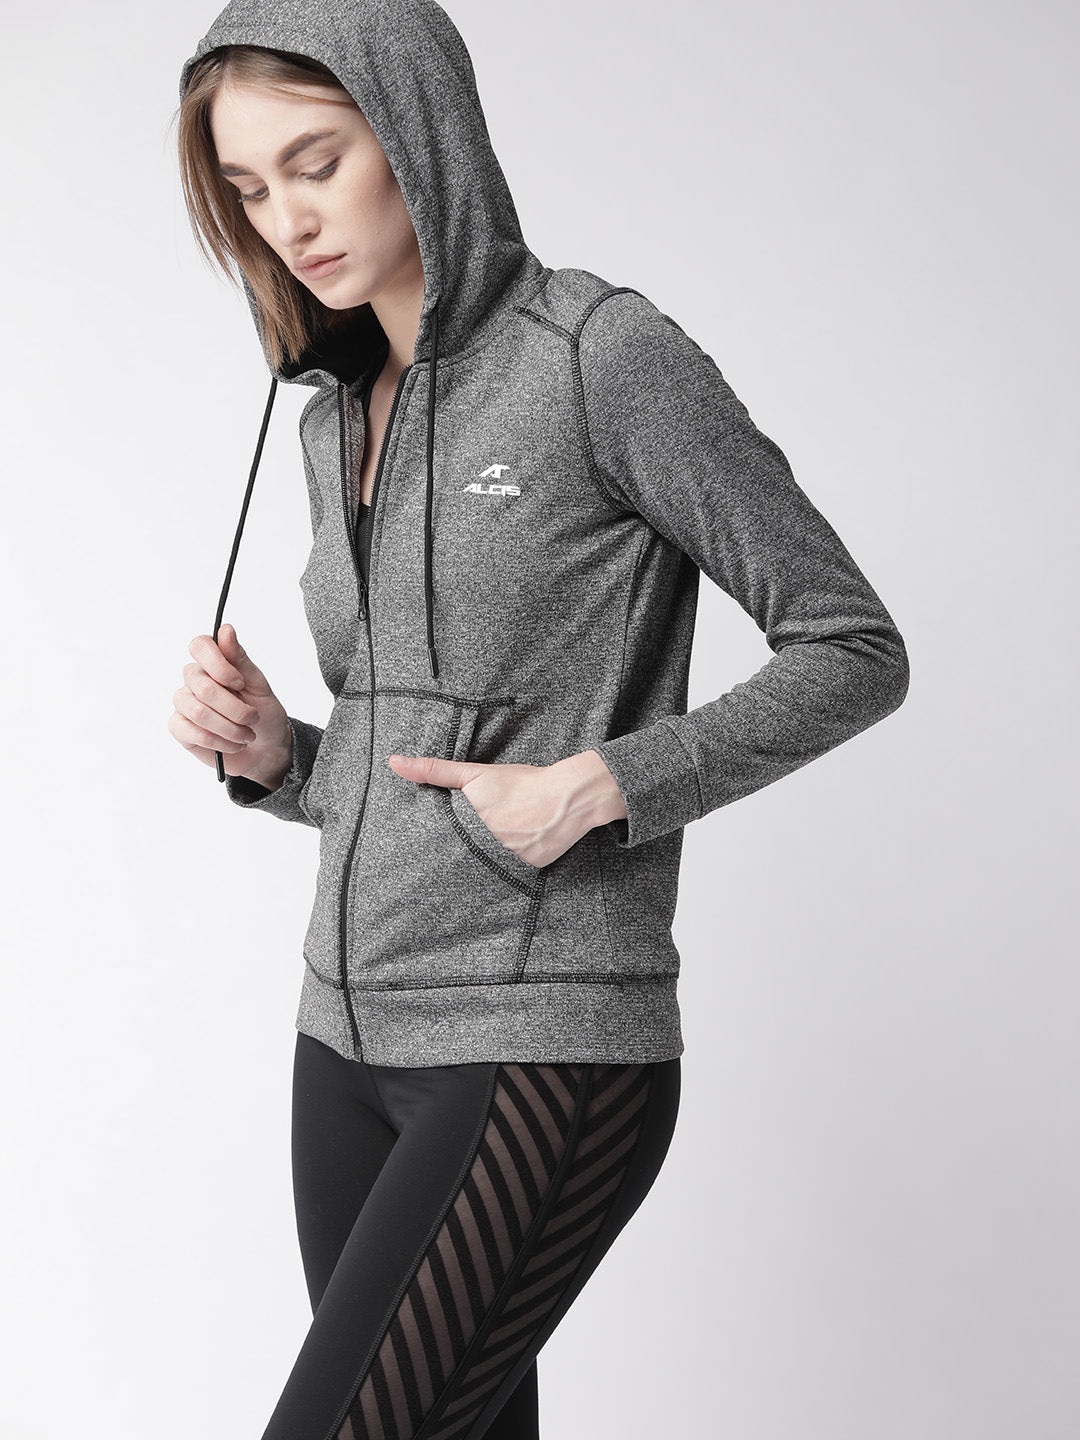 Alcis Women Charcoal Grey Self Design Hooded Sporty Jacket ALWHD02001-S